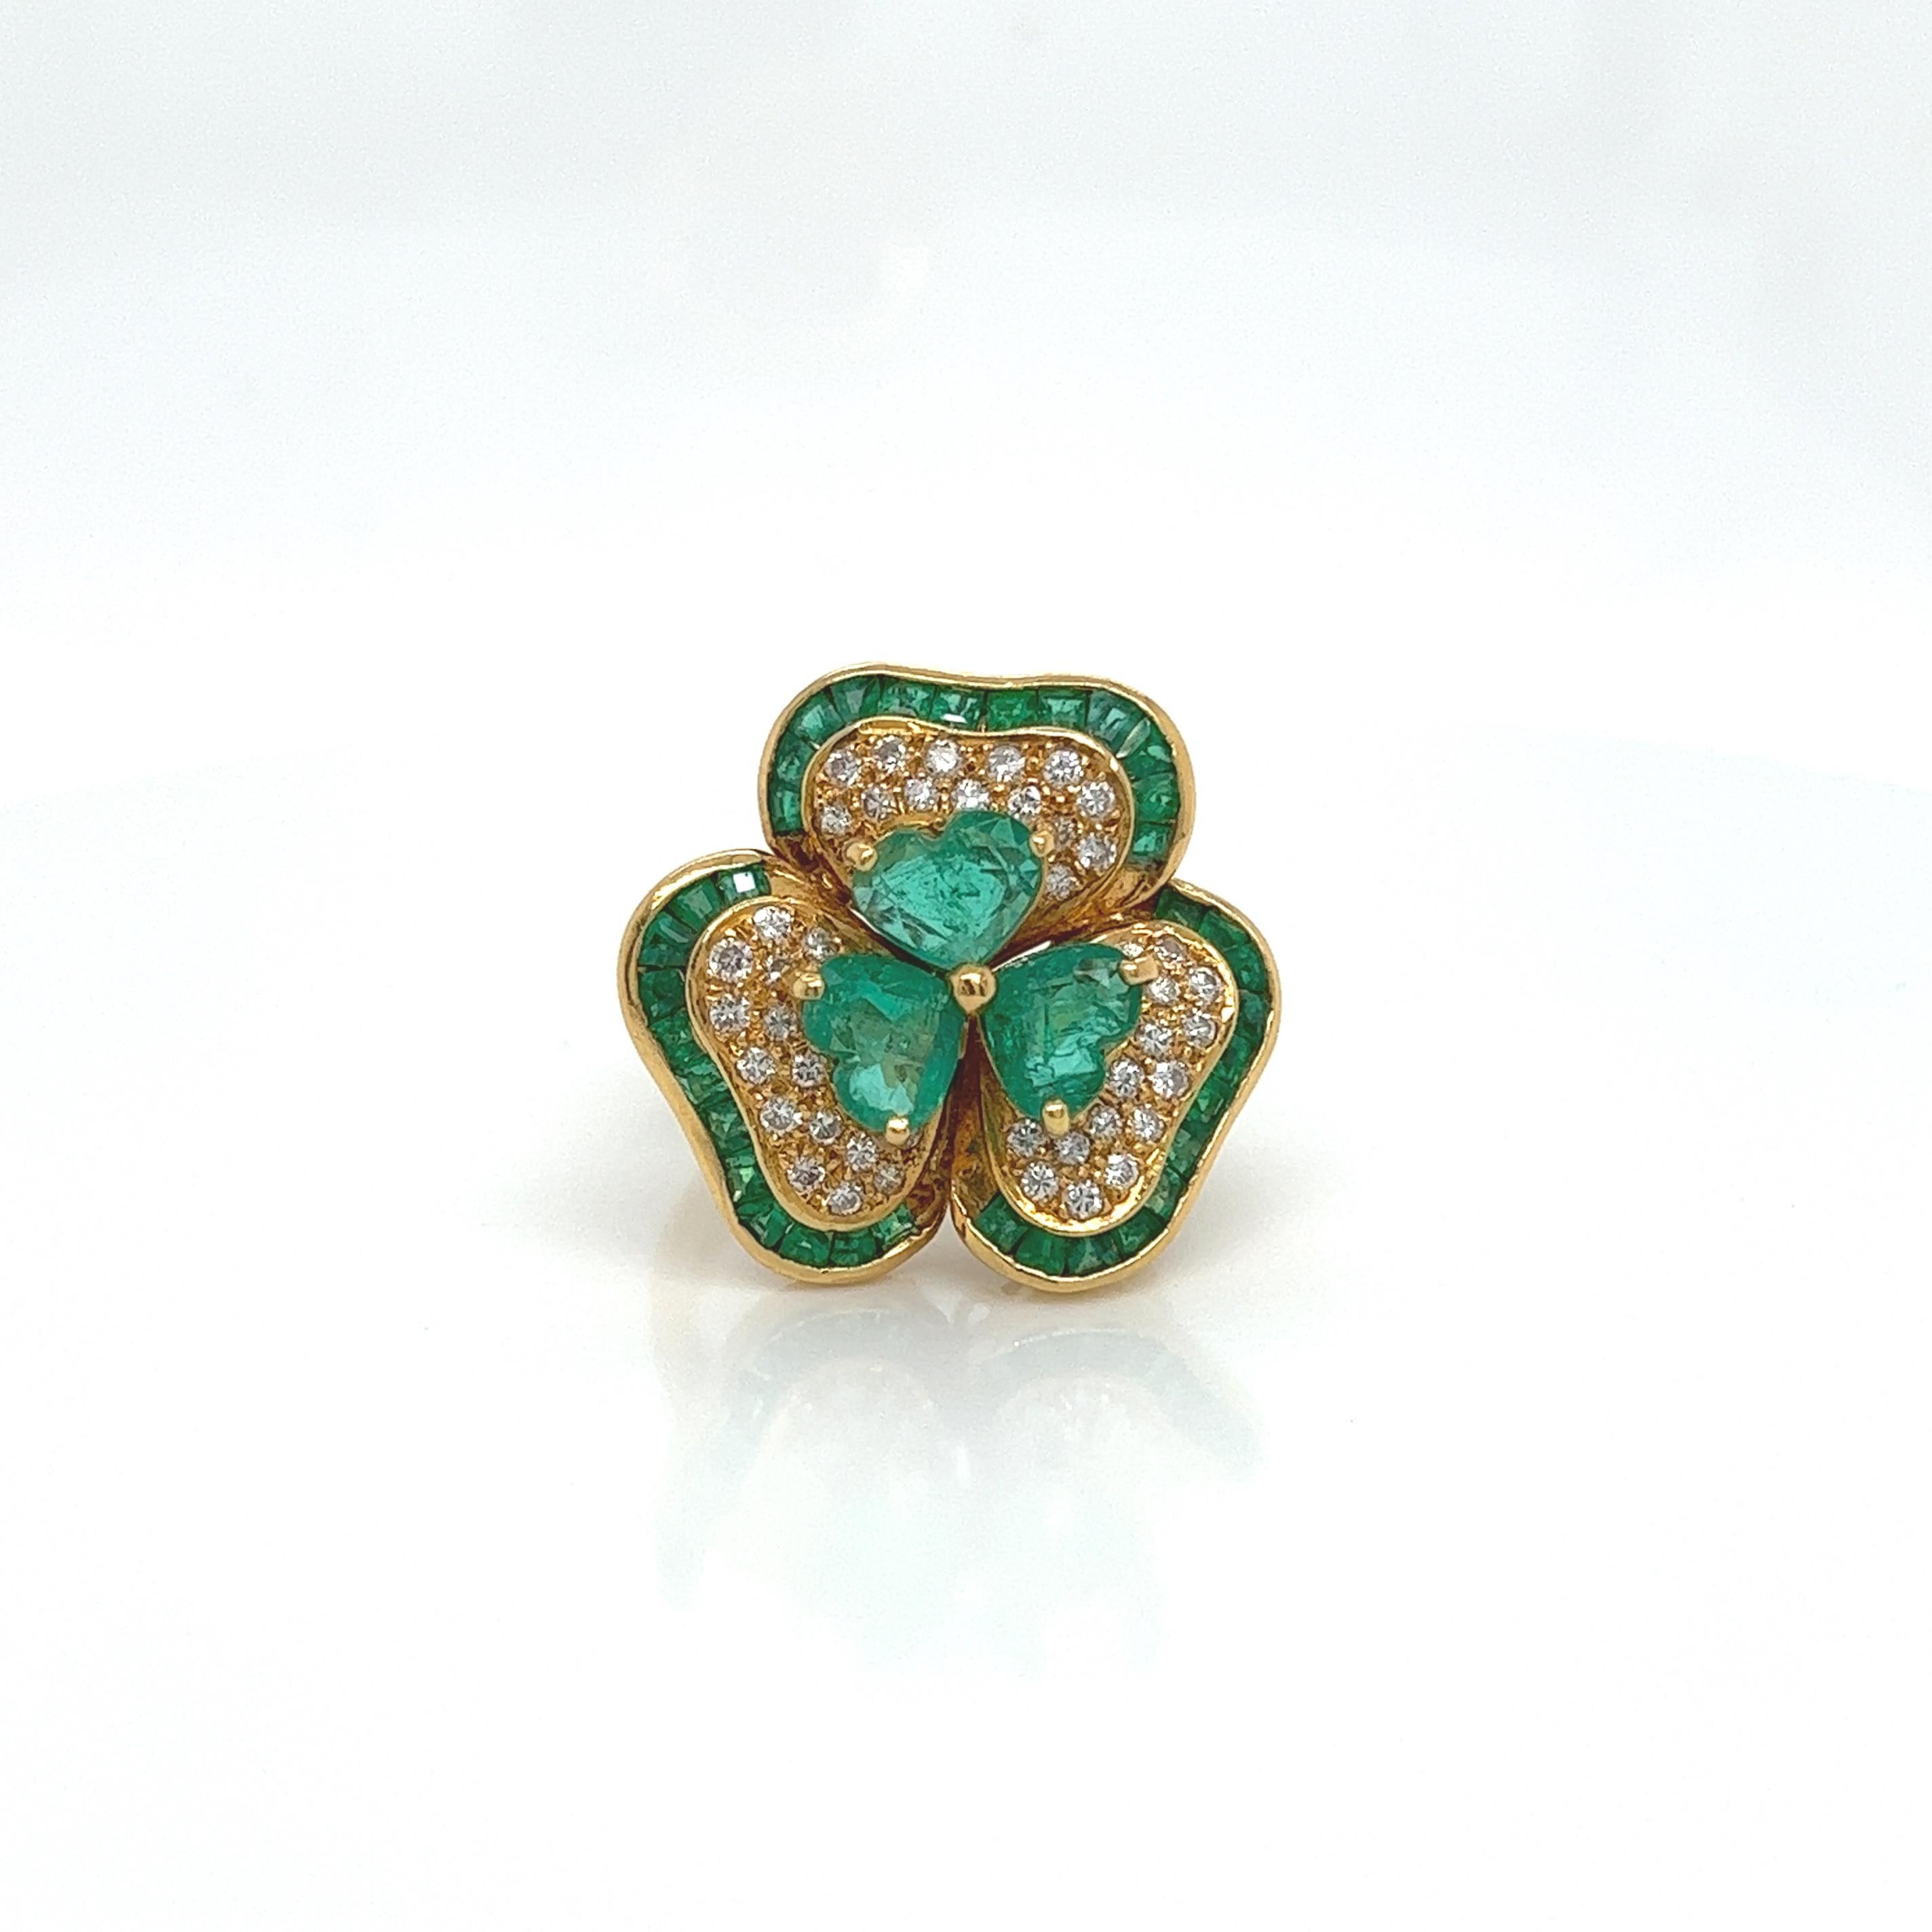 5.65 Total Carat Lucky Clover 18K Yellow Gold Diamond & Colombian Green Emerald Ladies Ring

SPECIFICATIONS:
-Main Emeralds: 3.60ct Colombian Green Emeralds
-Side Emeralds: 1.50ct Chanel Set Emeralds
-Diamonds: 0.55ct Round Brilliant Cut